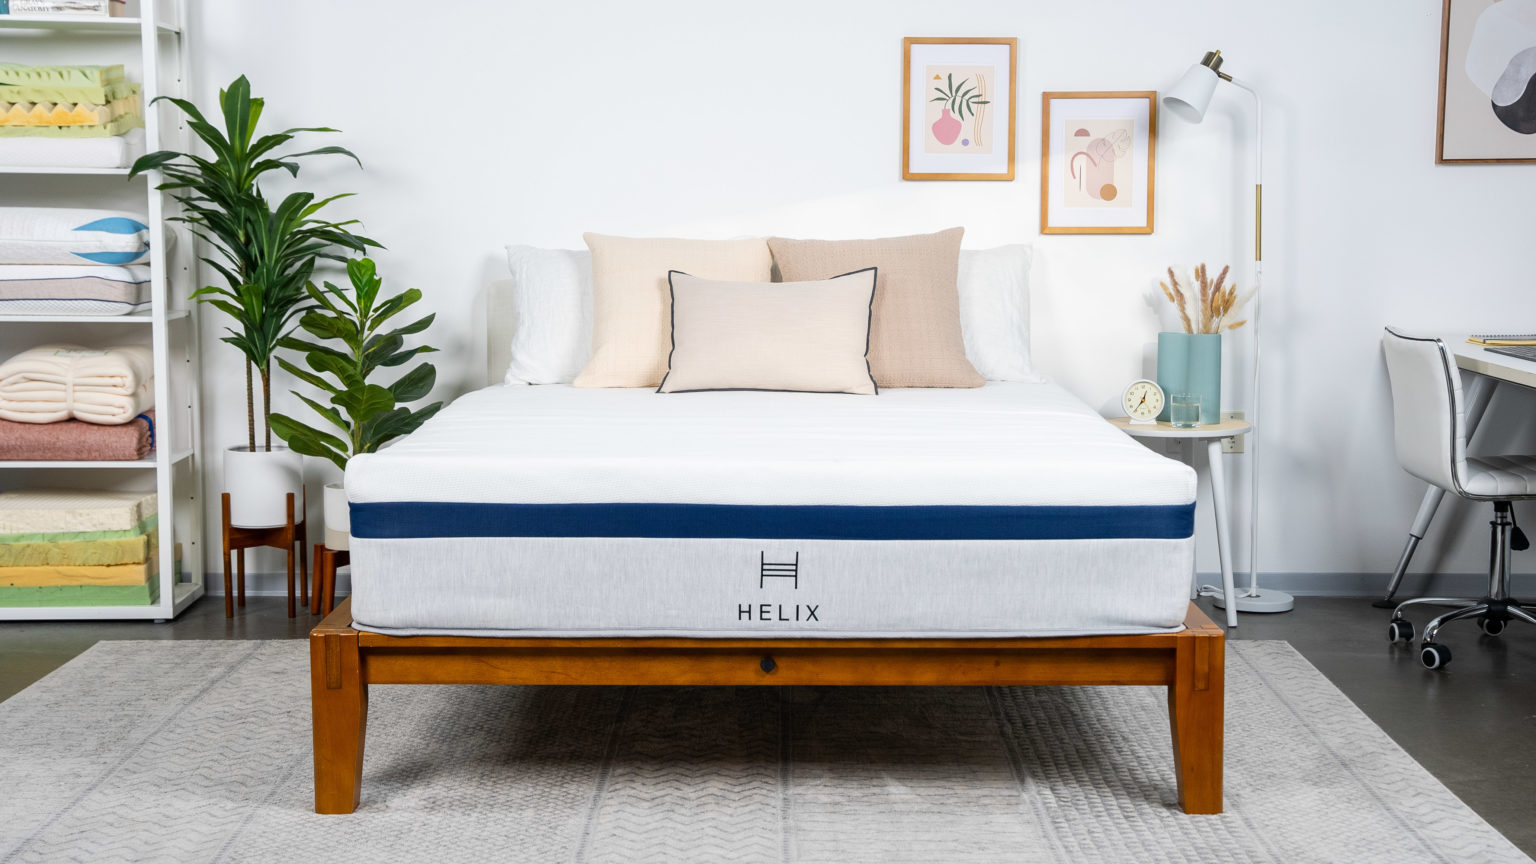 How Long Does A Helix Mattress Take To Expand?